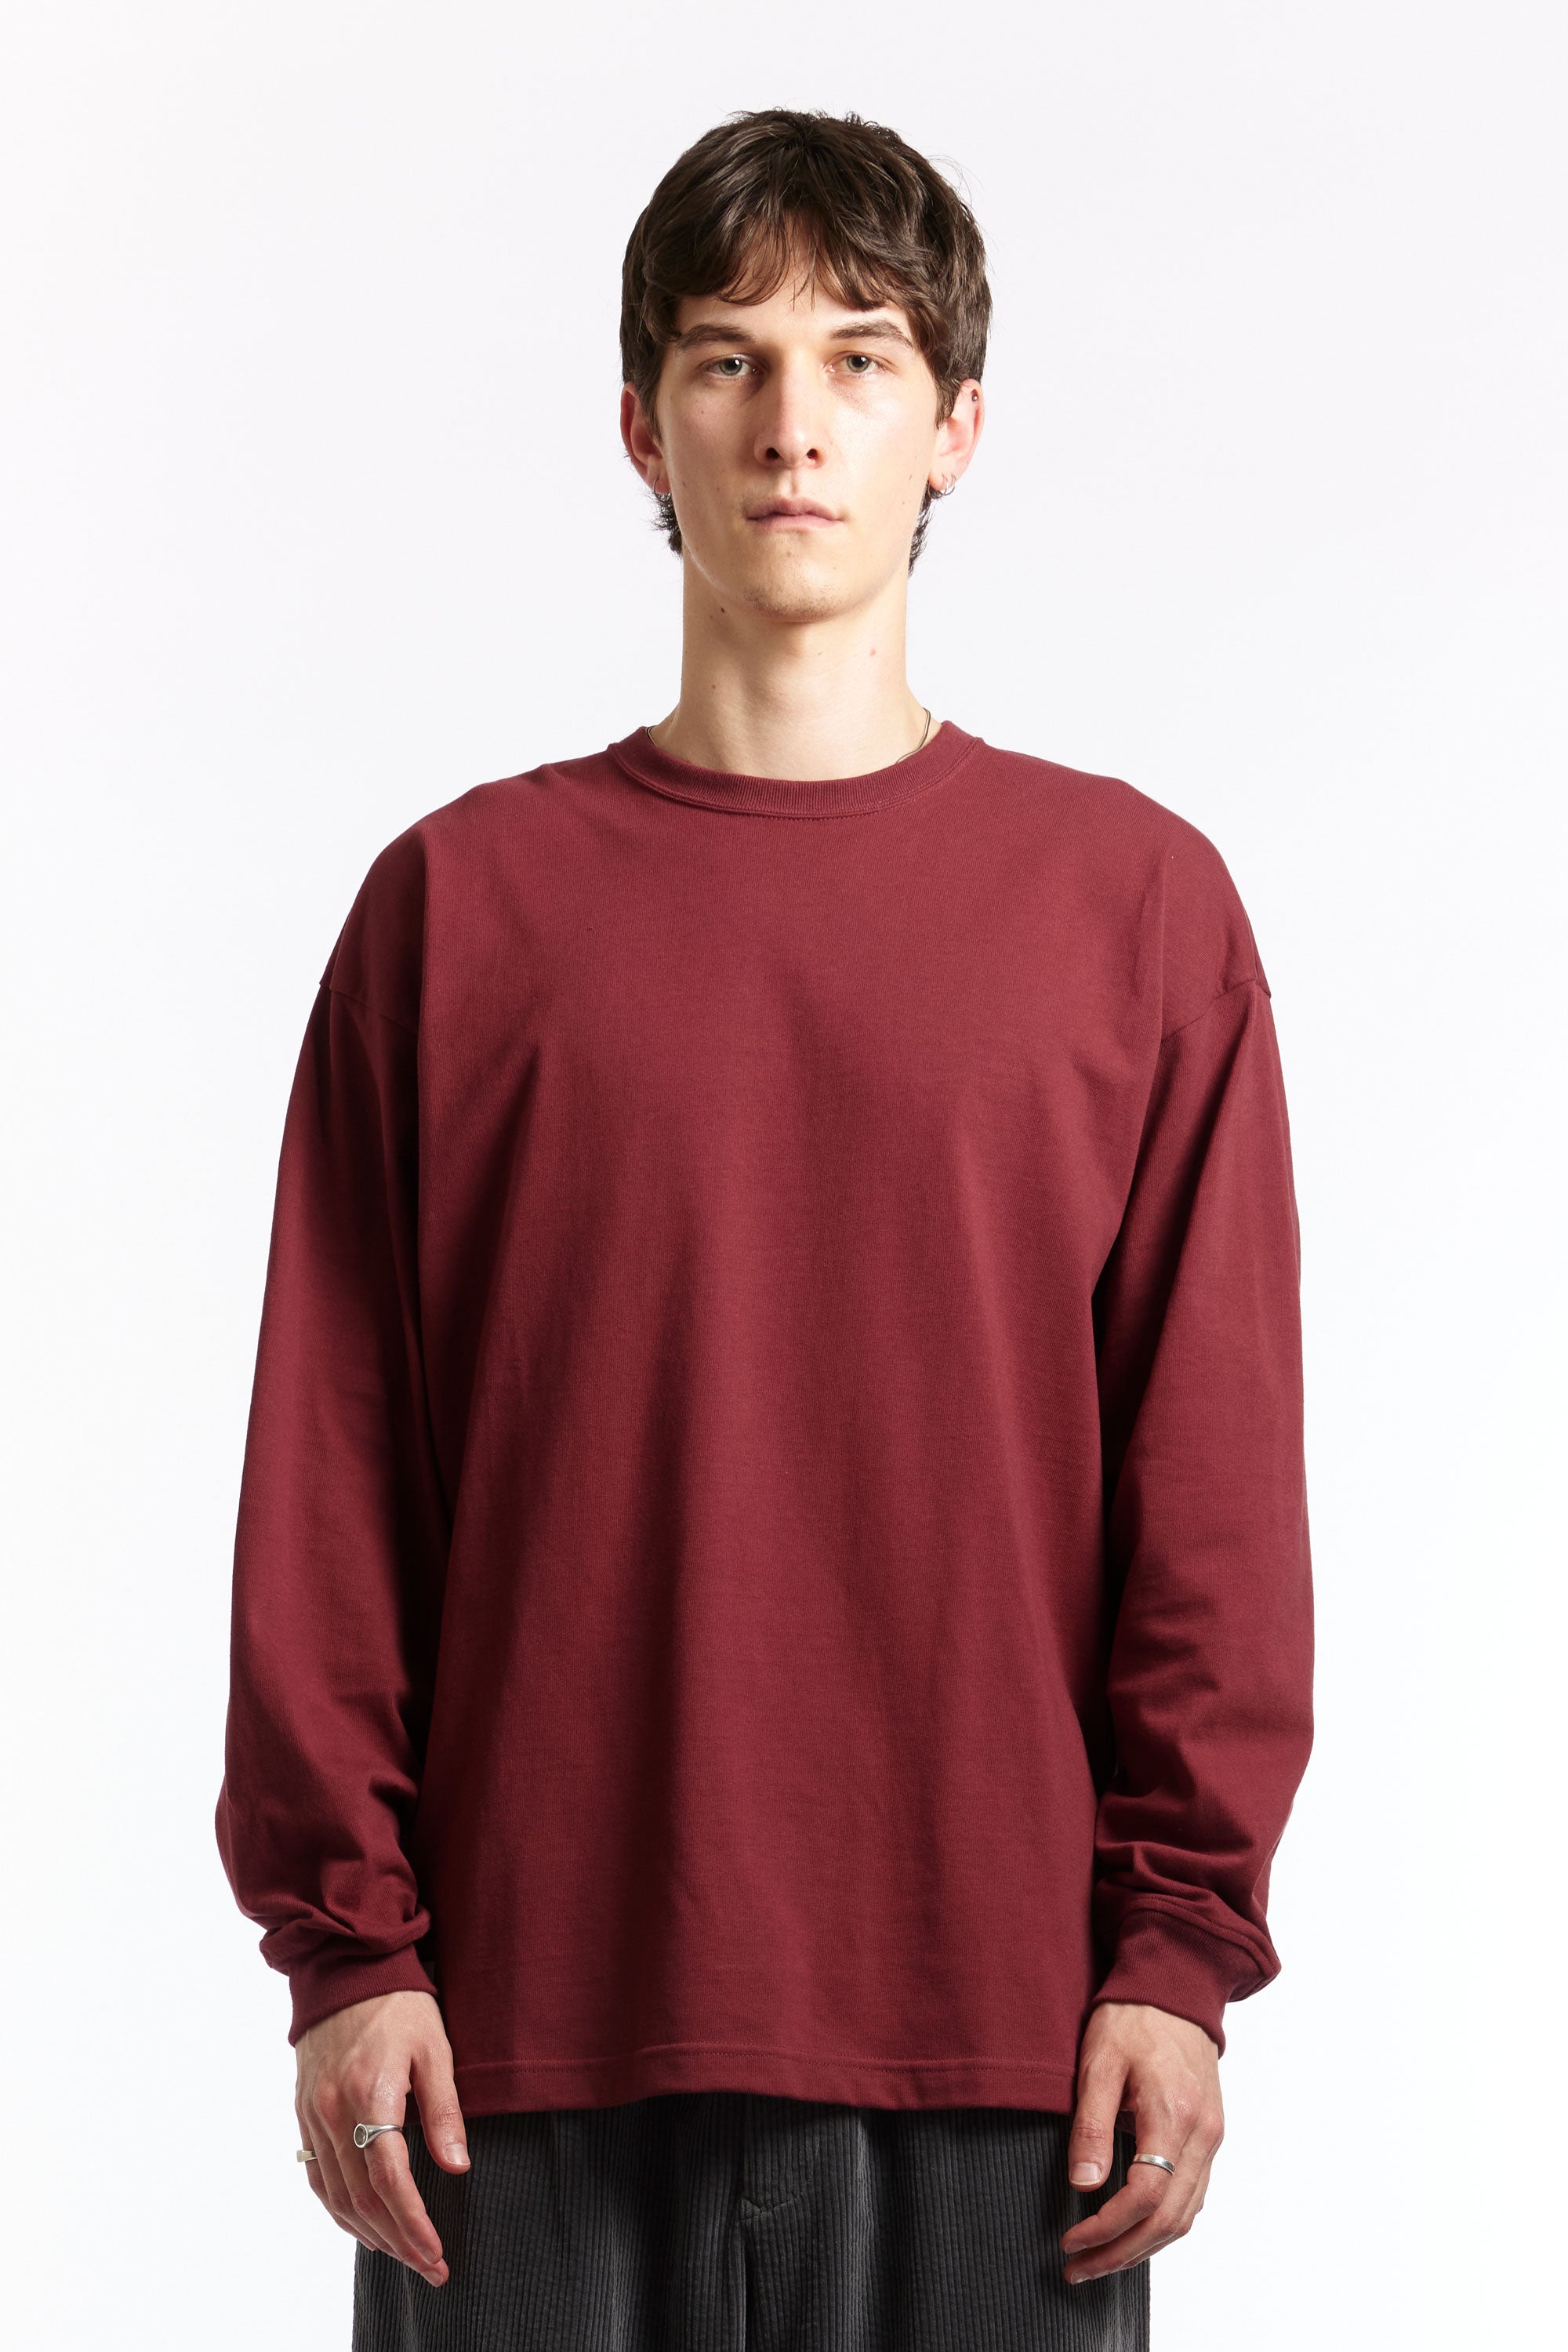 The WTAPS - OBJ 01 COTTON CONTAINING LS BURGUNDY available online with global shipping, and in PAM Stores Melbourne and Sydney.